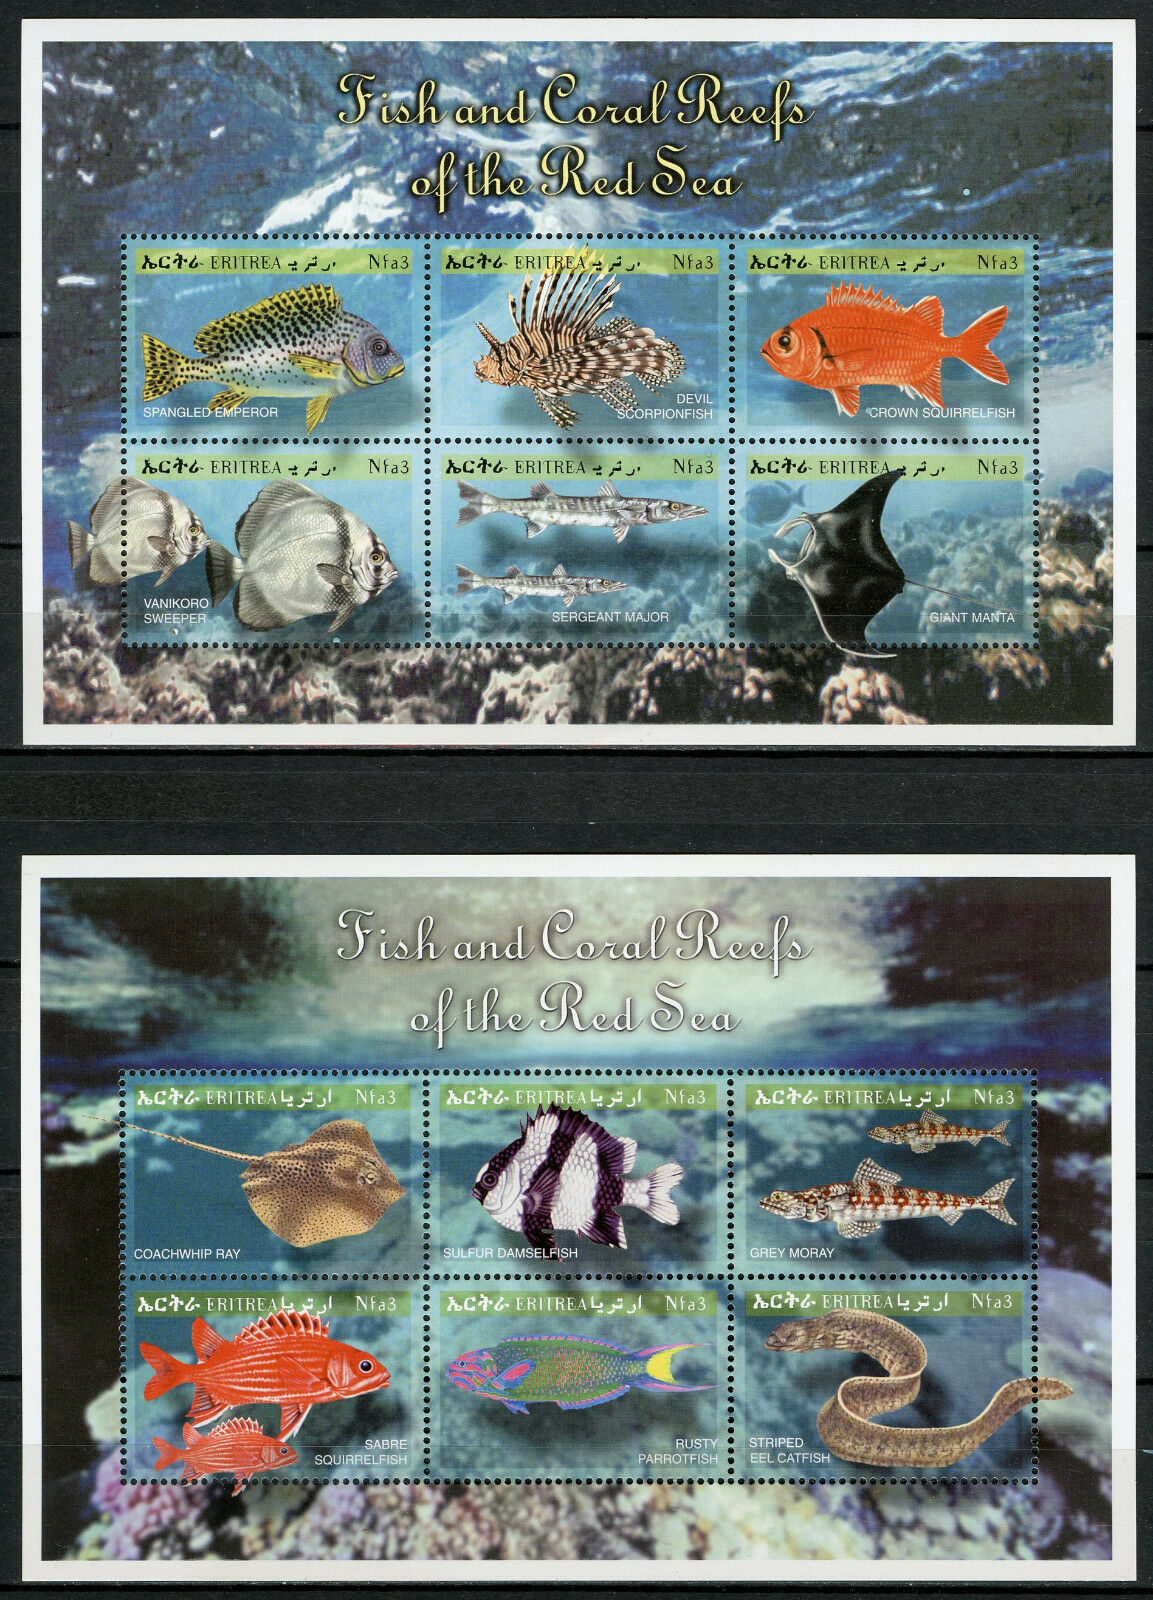 Eritrea 2000 MNH Fish & Coral Reefs of Red Sea 4x 6v M/S Fishes Corals Stamps